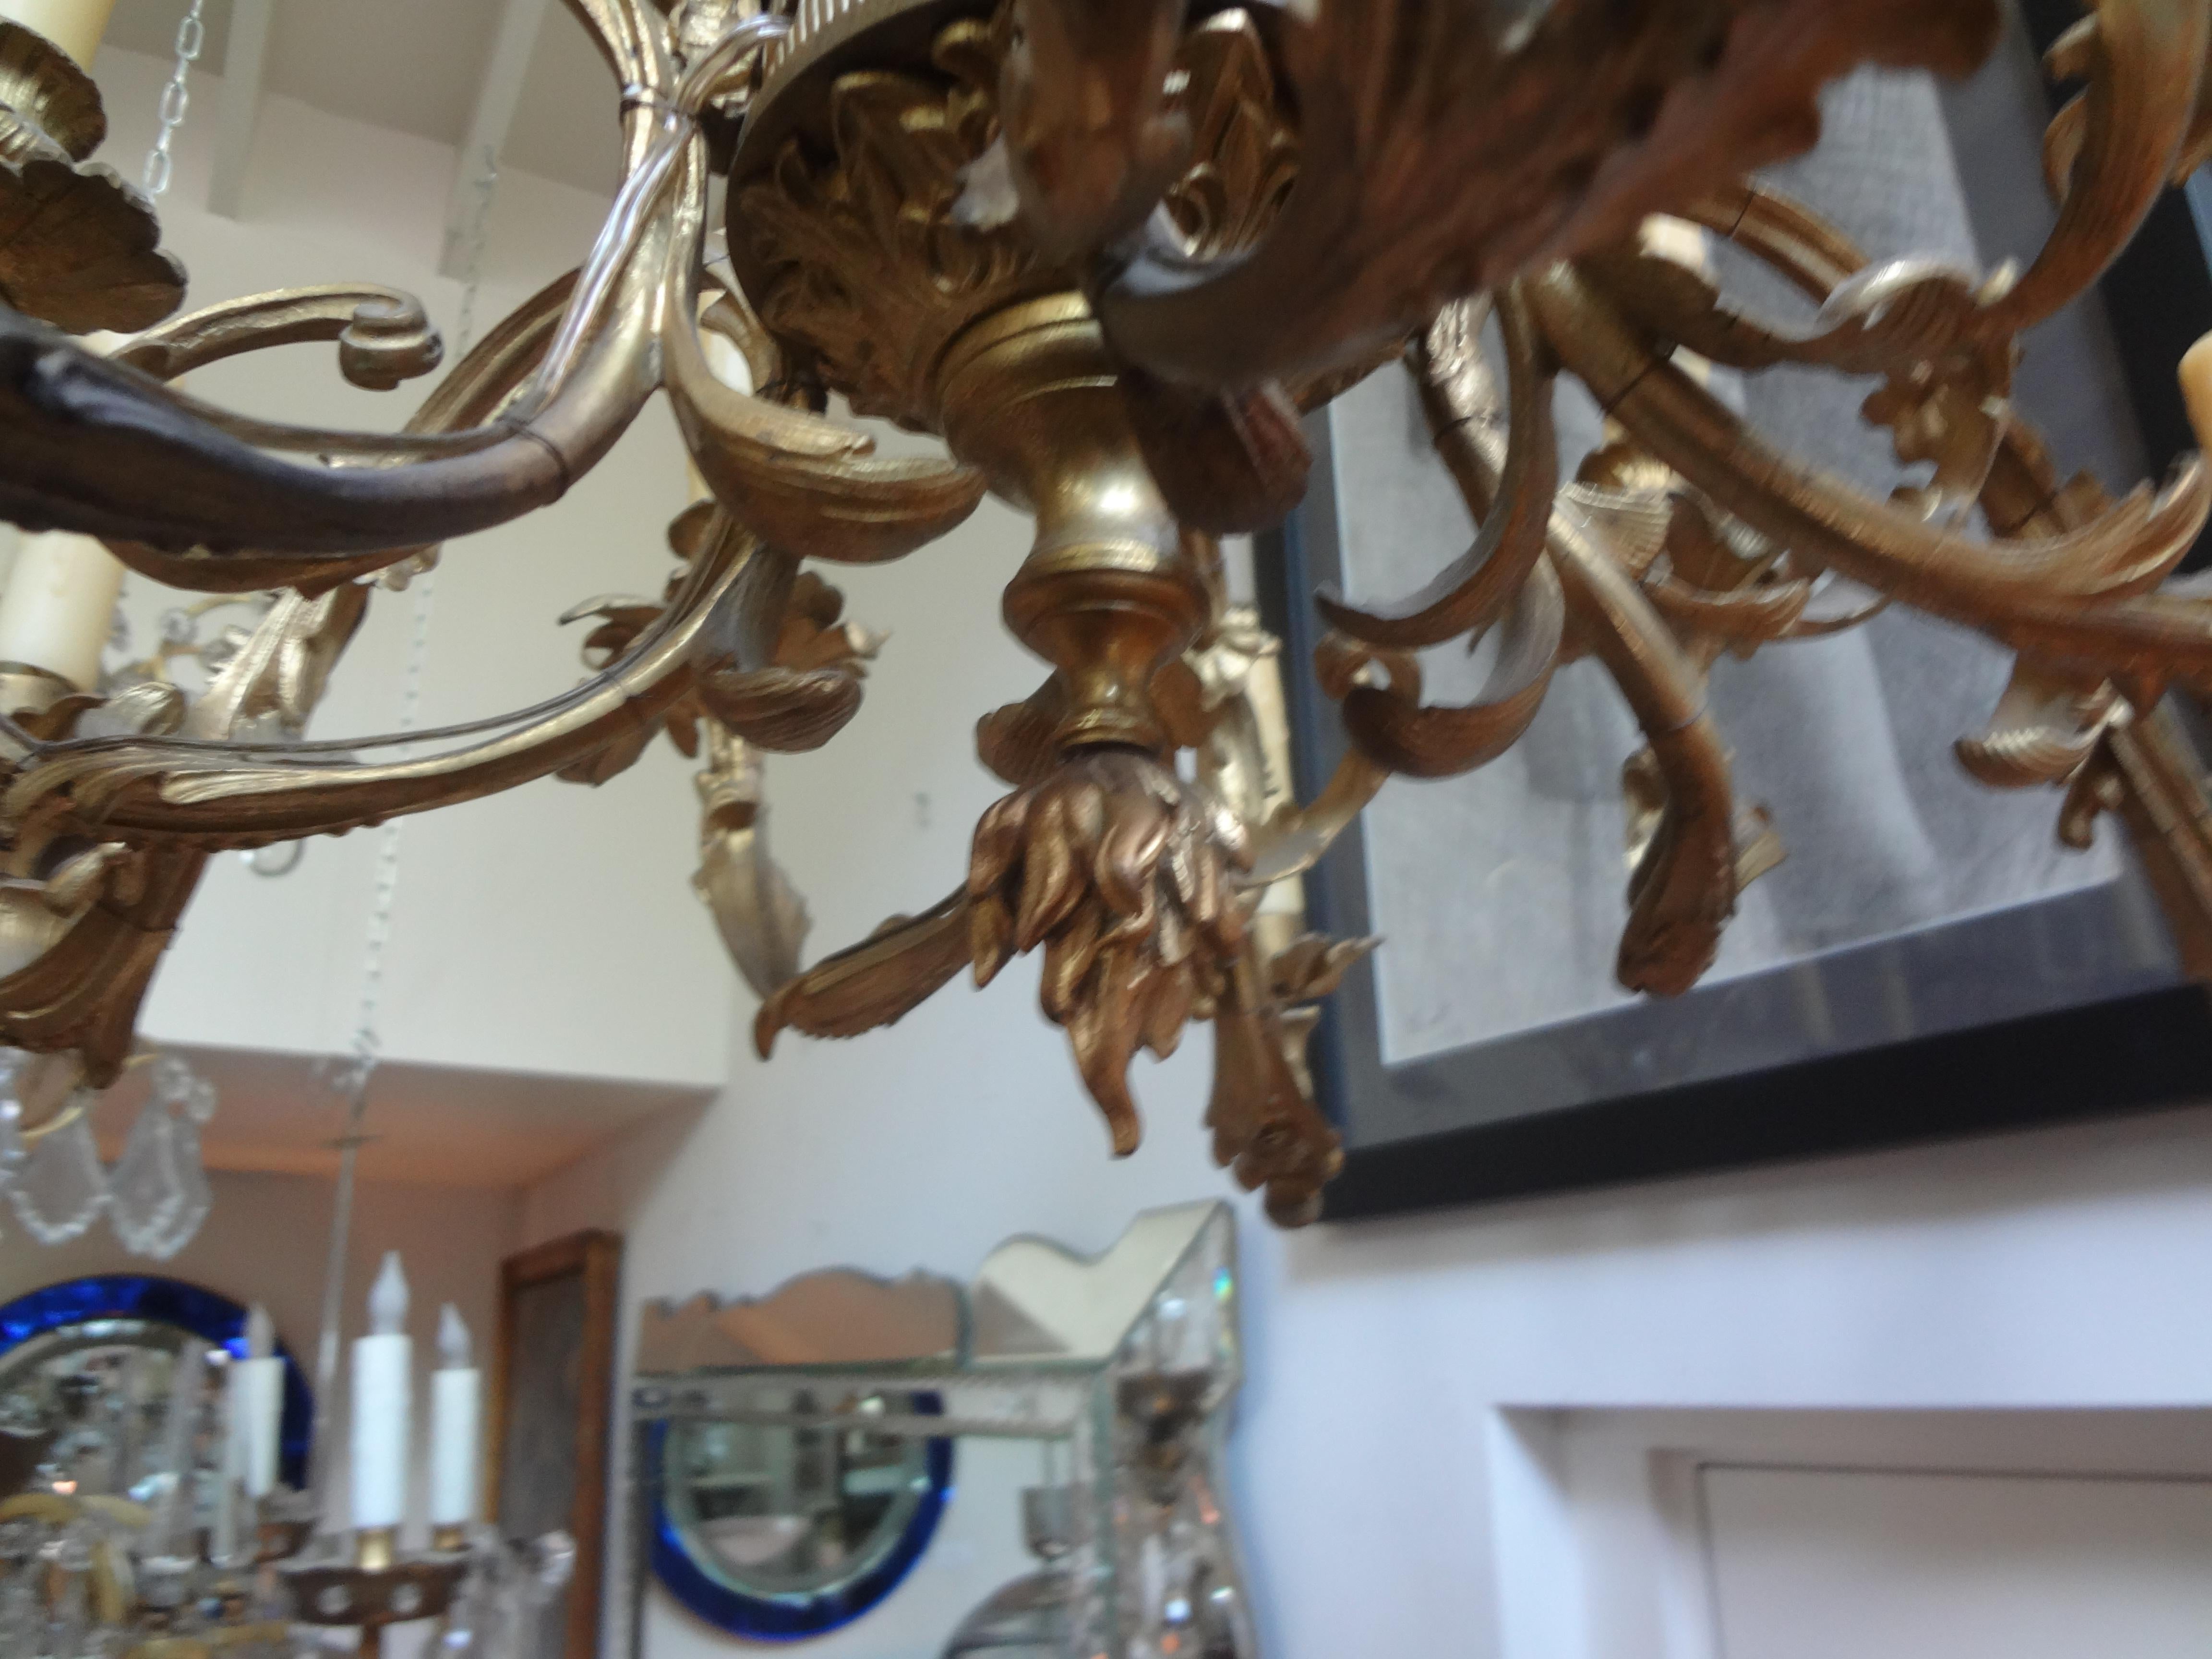 Antique French Louis XV Style bronze and crystal chandelier.
Stunning French Louis XV style bronze and crystal chandelier, circa. 1920. This gorgeous French bronze chandelier has been newly wired to U.S. Specifications.